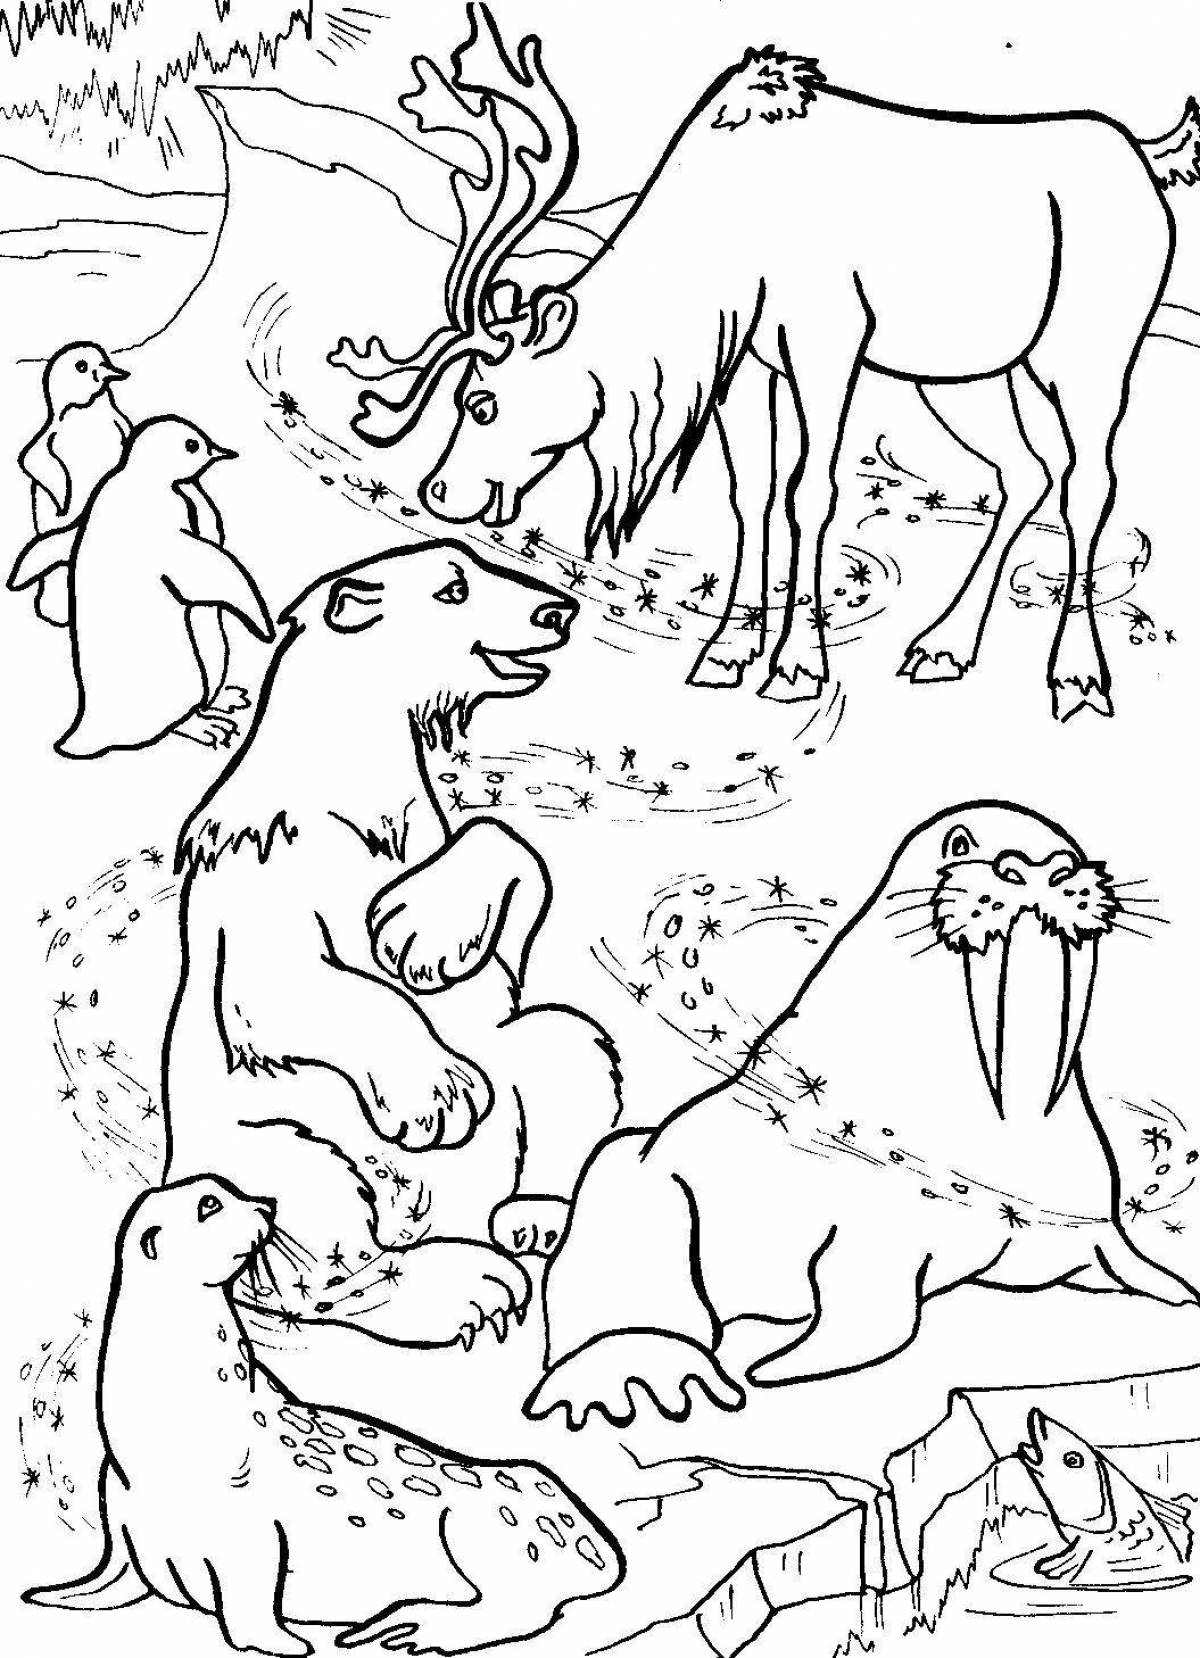 Coloring page fascinating animals of the far north